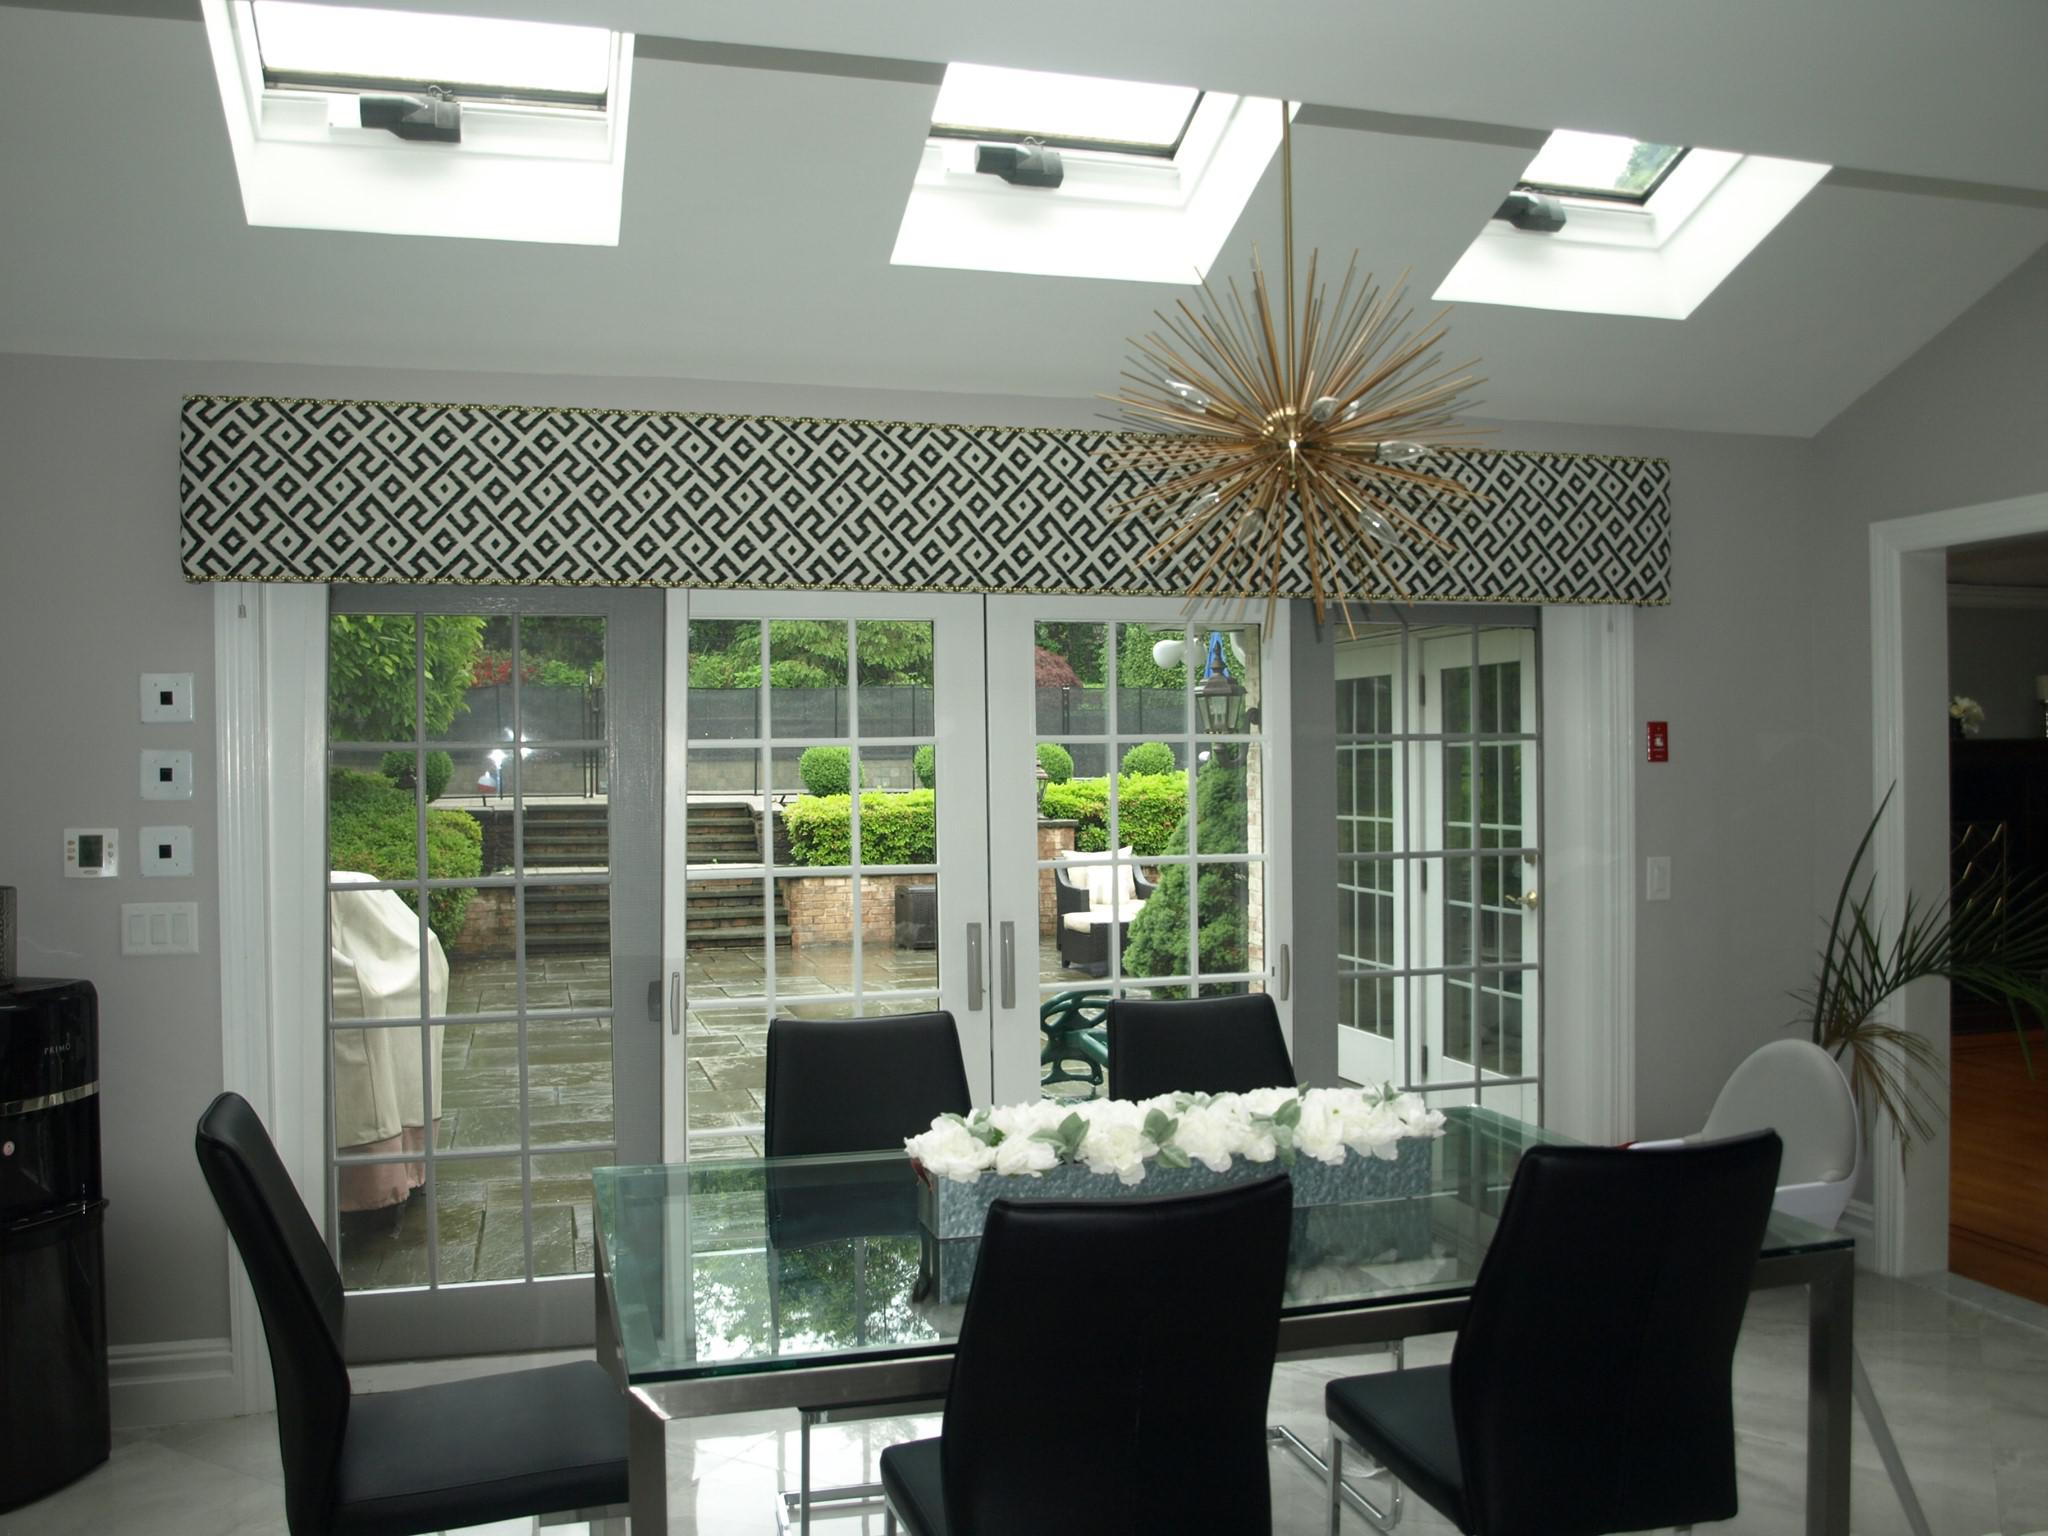 Patio doors and skylights can brighten up any room. However, that alone can leave something to be desired...but what? A custom cornice in the perfect pattern is your answer! Call Budget Blinds of Glendale & North Hollywood for your finishing touch! #BudgetBlindsOfGlendale #FreeConsultation #WindowWe